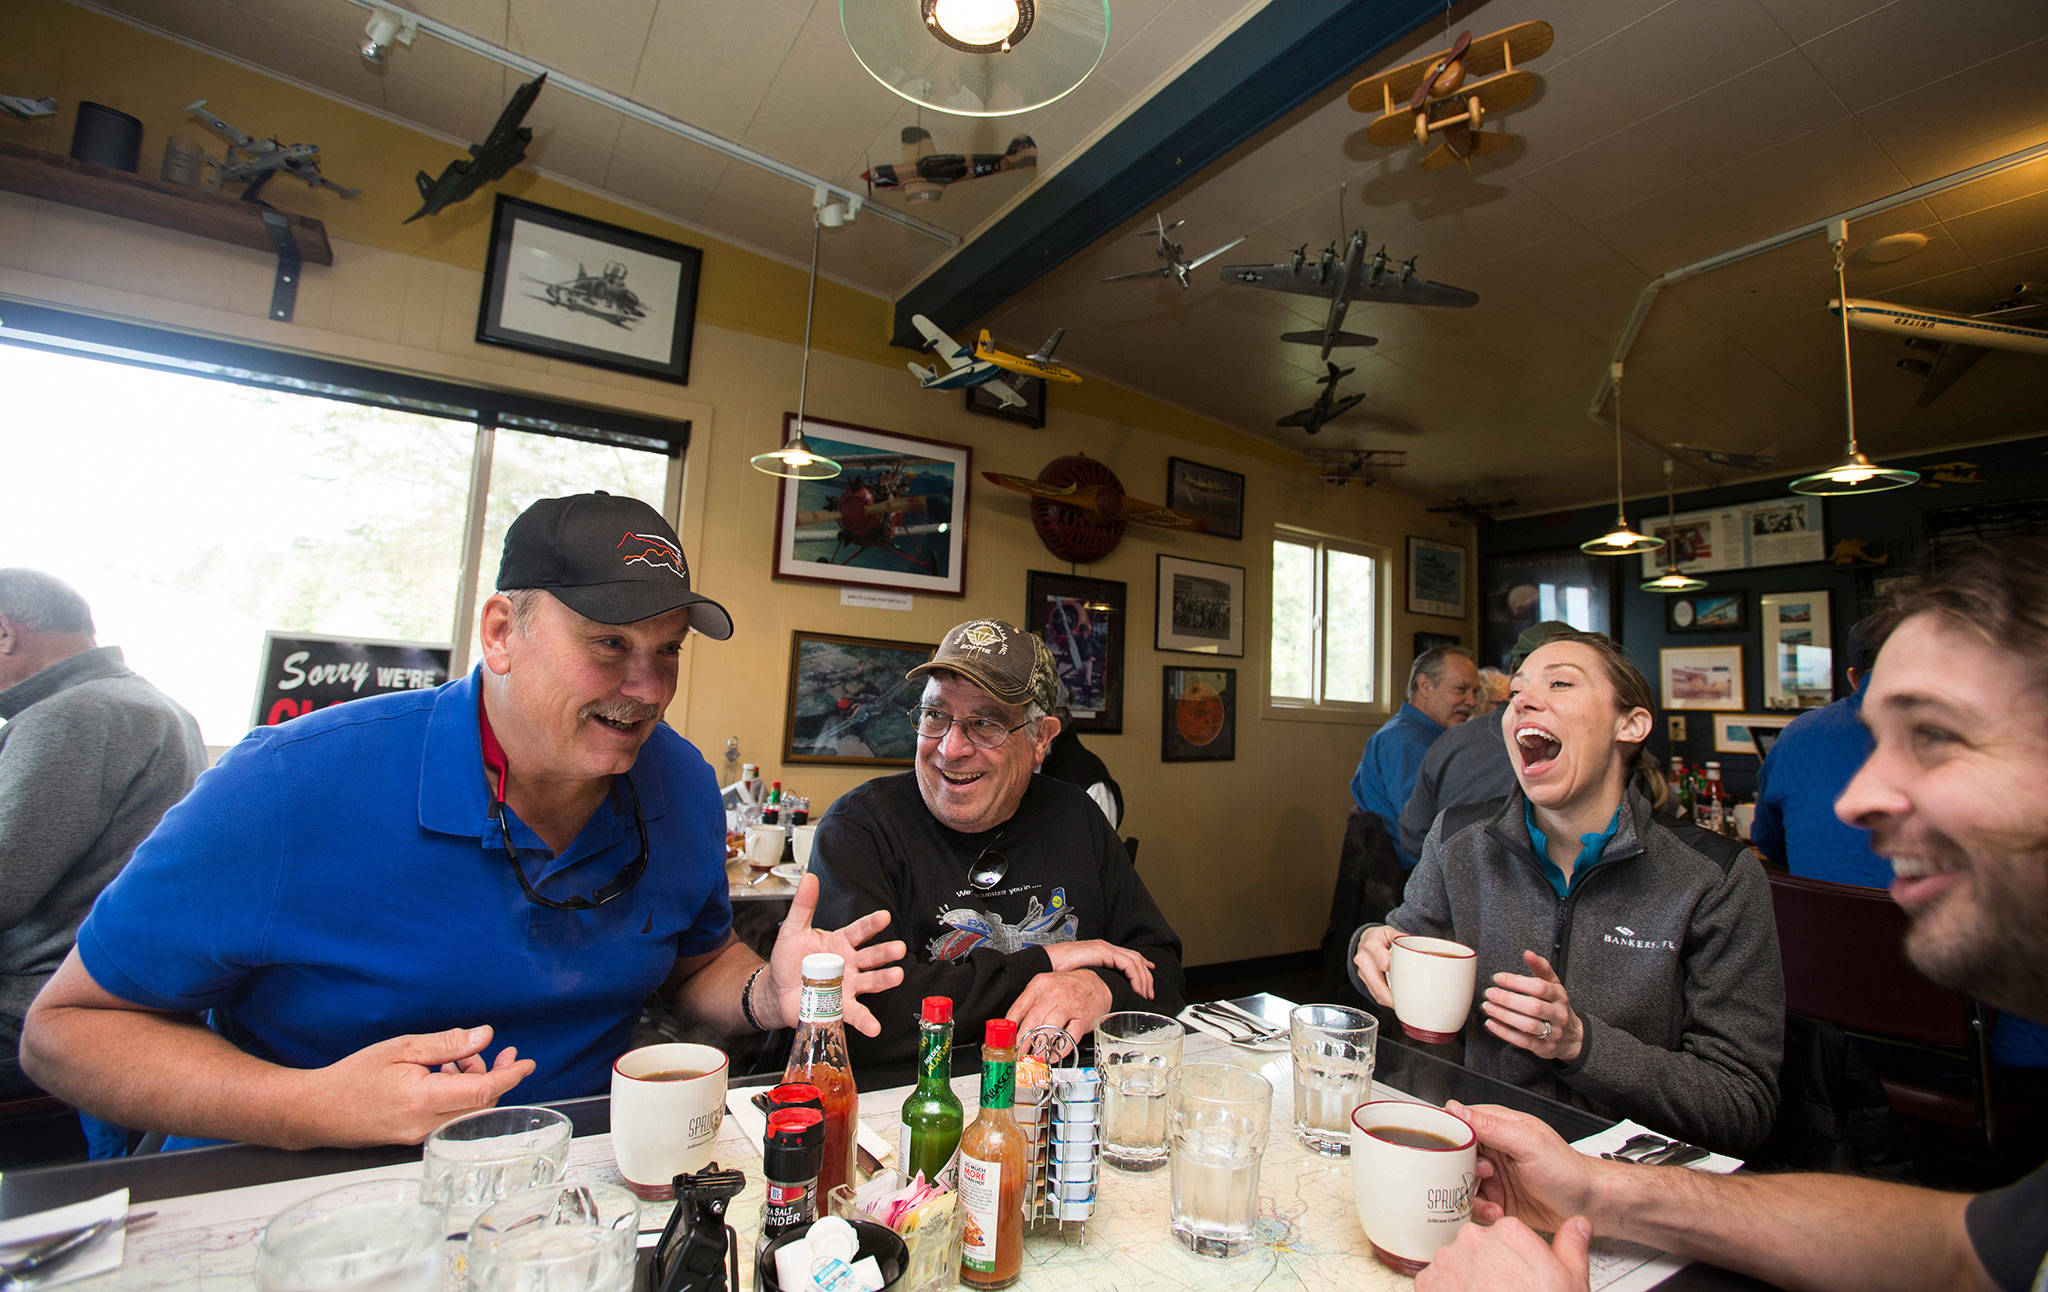 After flying in from Arlington, pilot Todd Bohon gets a laugh from fellow pilots (from left) Dan Tarasievich, Trisa Jackson and Ryan LaPointe during breakfast at the Spruce Goose Cafe in Port Townsend. (Andy Bronson / The Herald)